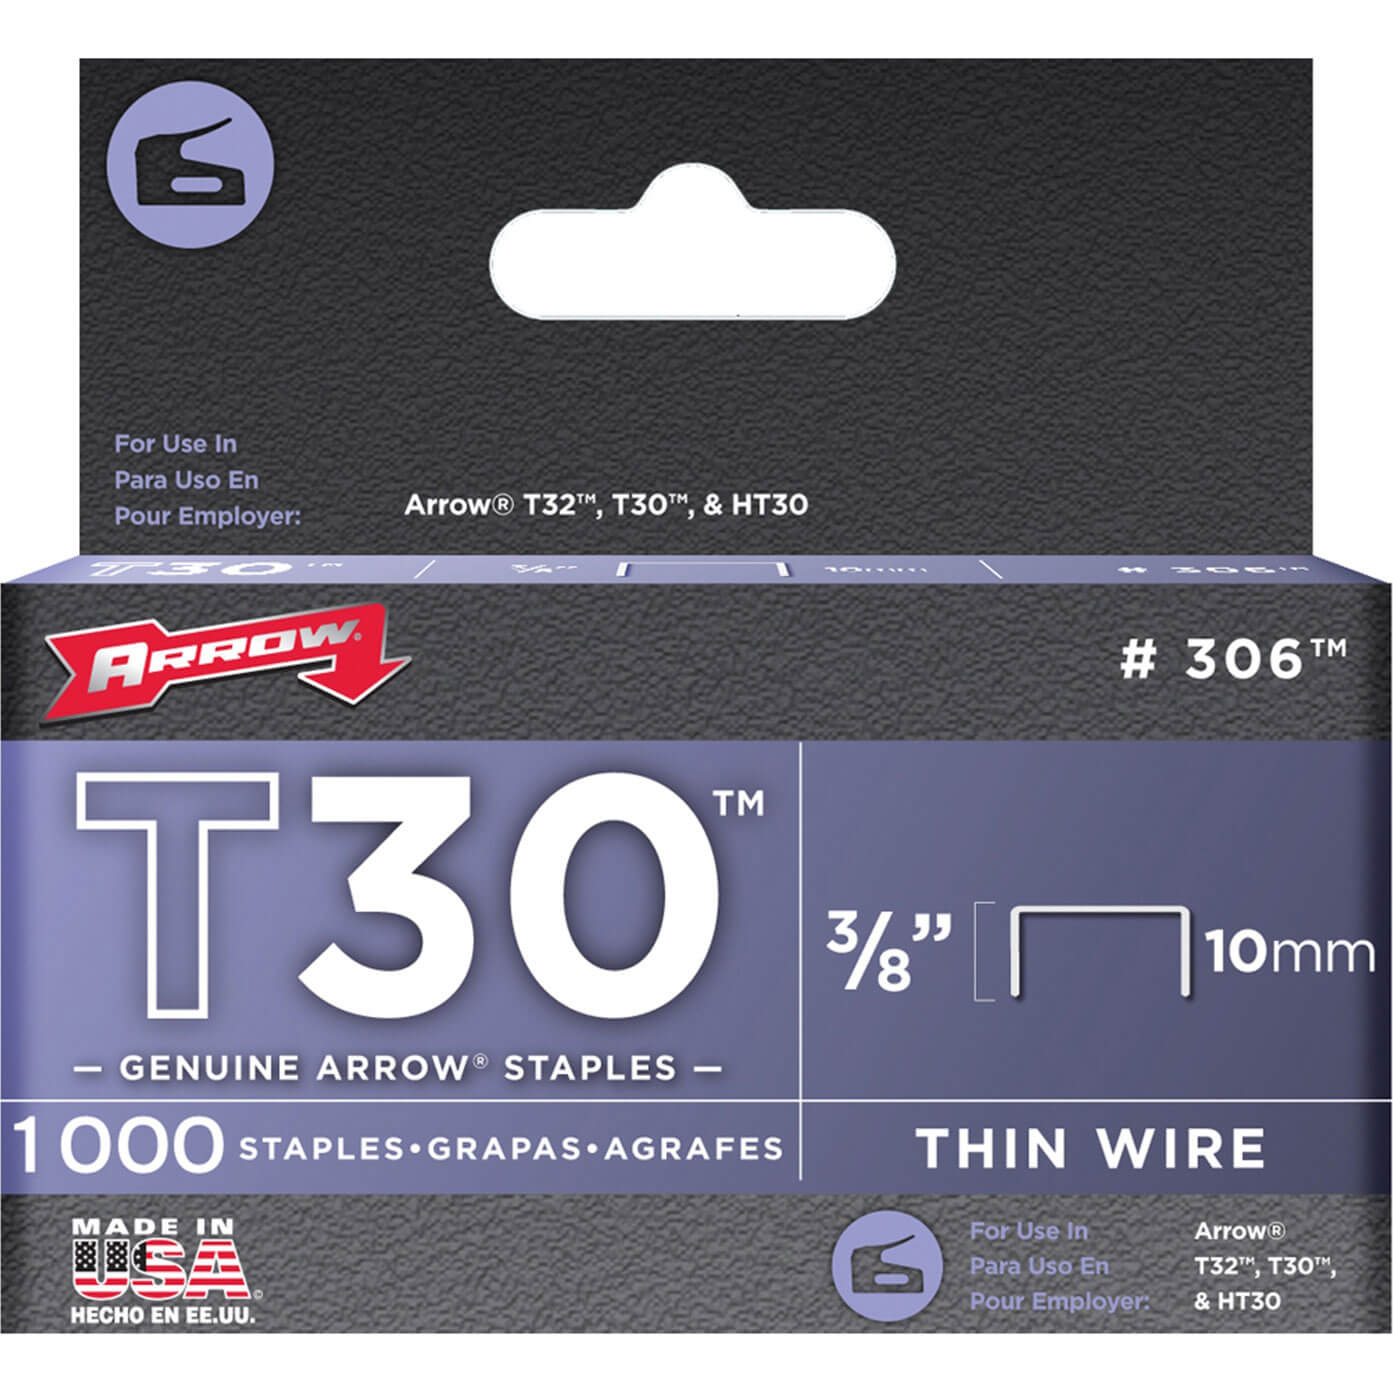 Image of Arrow T30 Staples 10mm Pack of 5000